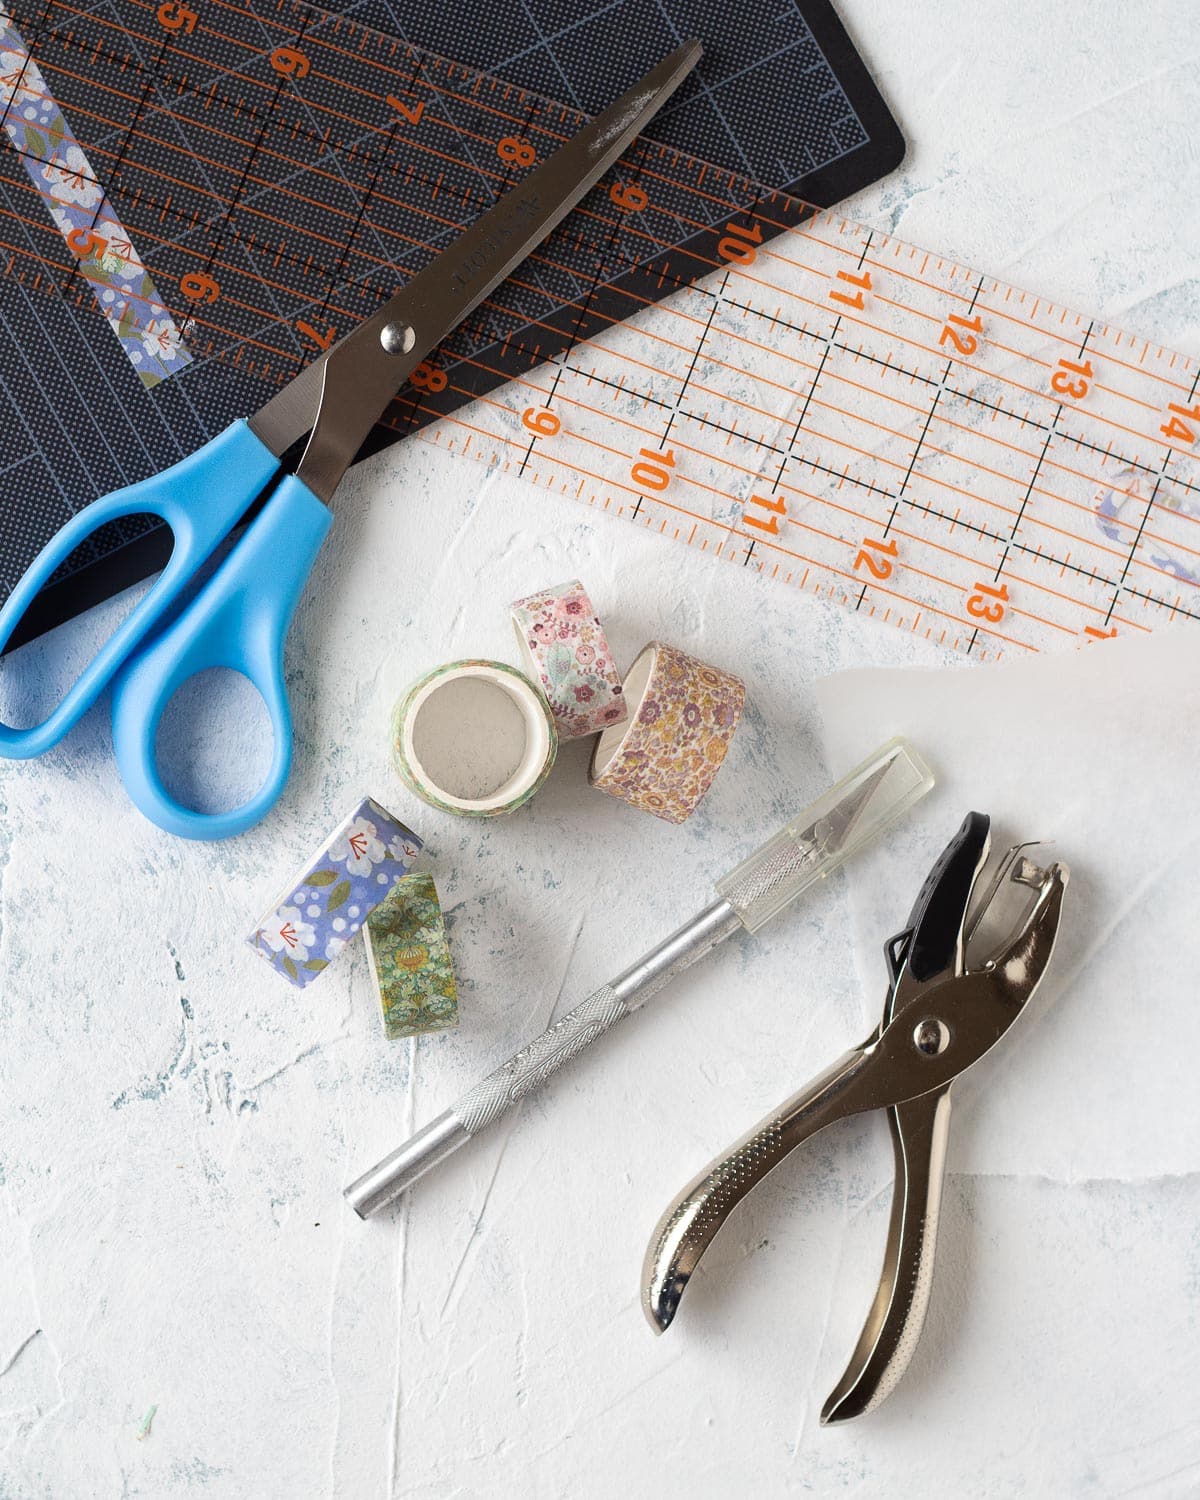 How to Cut Washi Tape Quickly and Easily